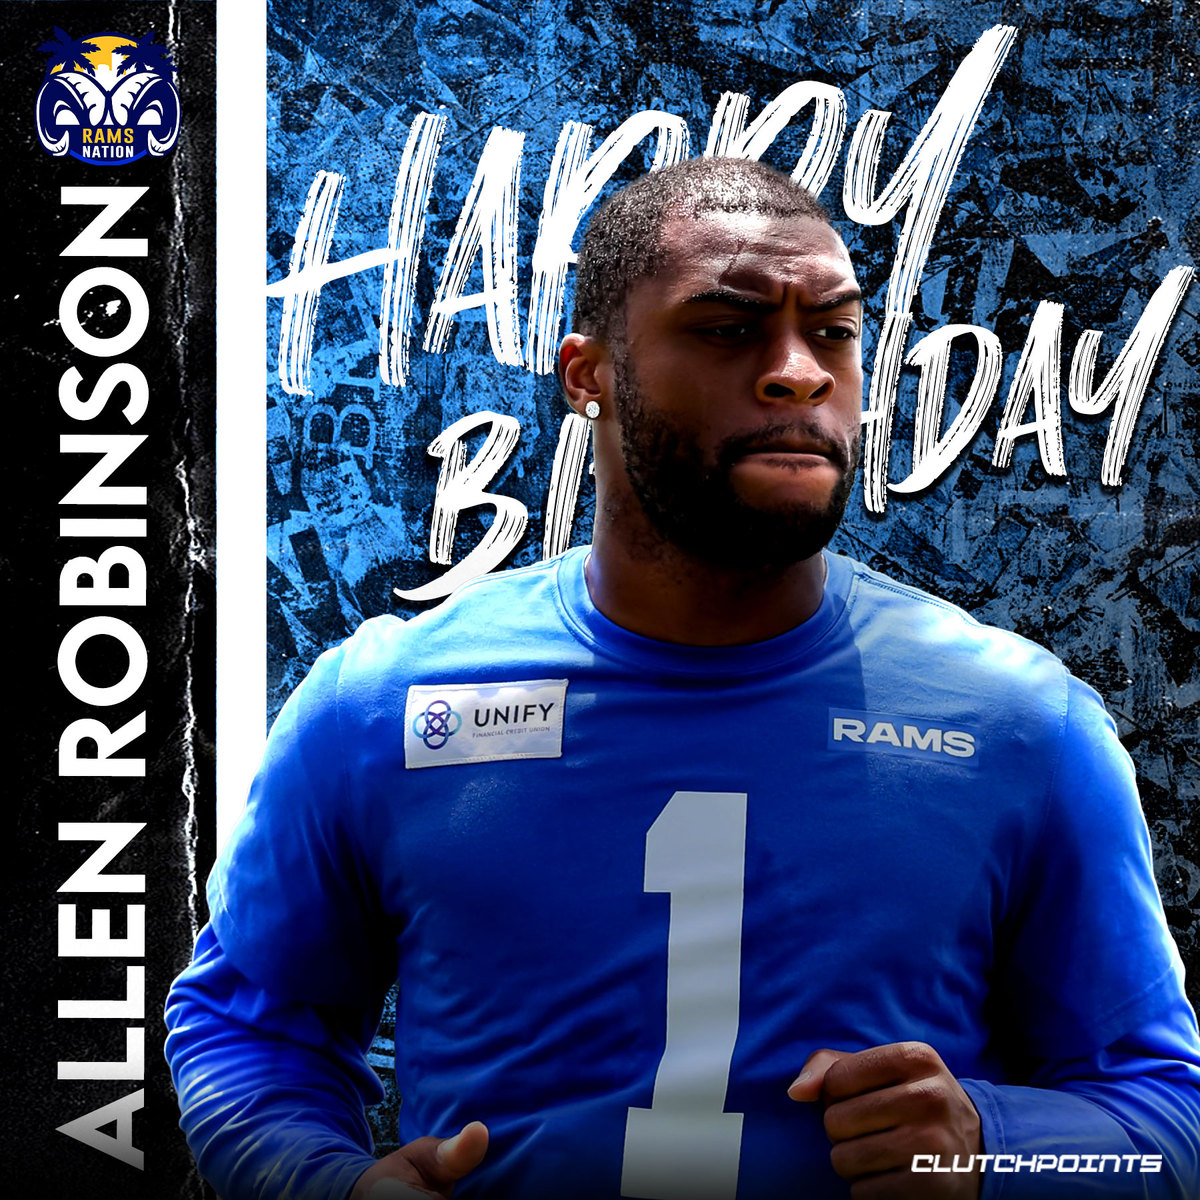 Join Rams Nation as we greet Allen Robinson with a happy 29th birthday! 